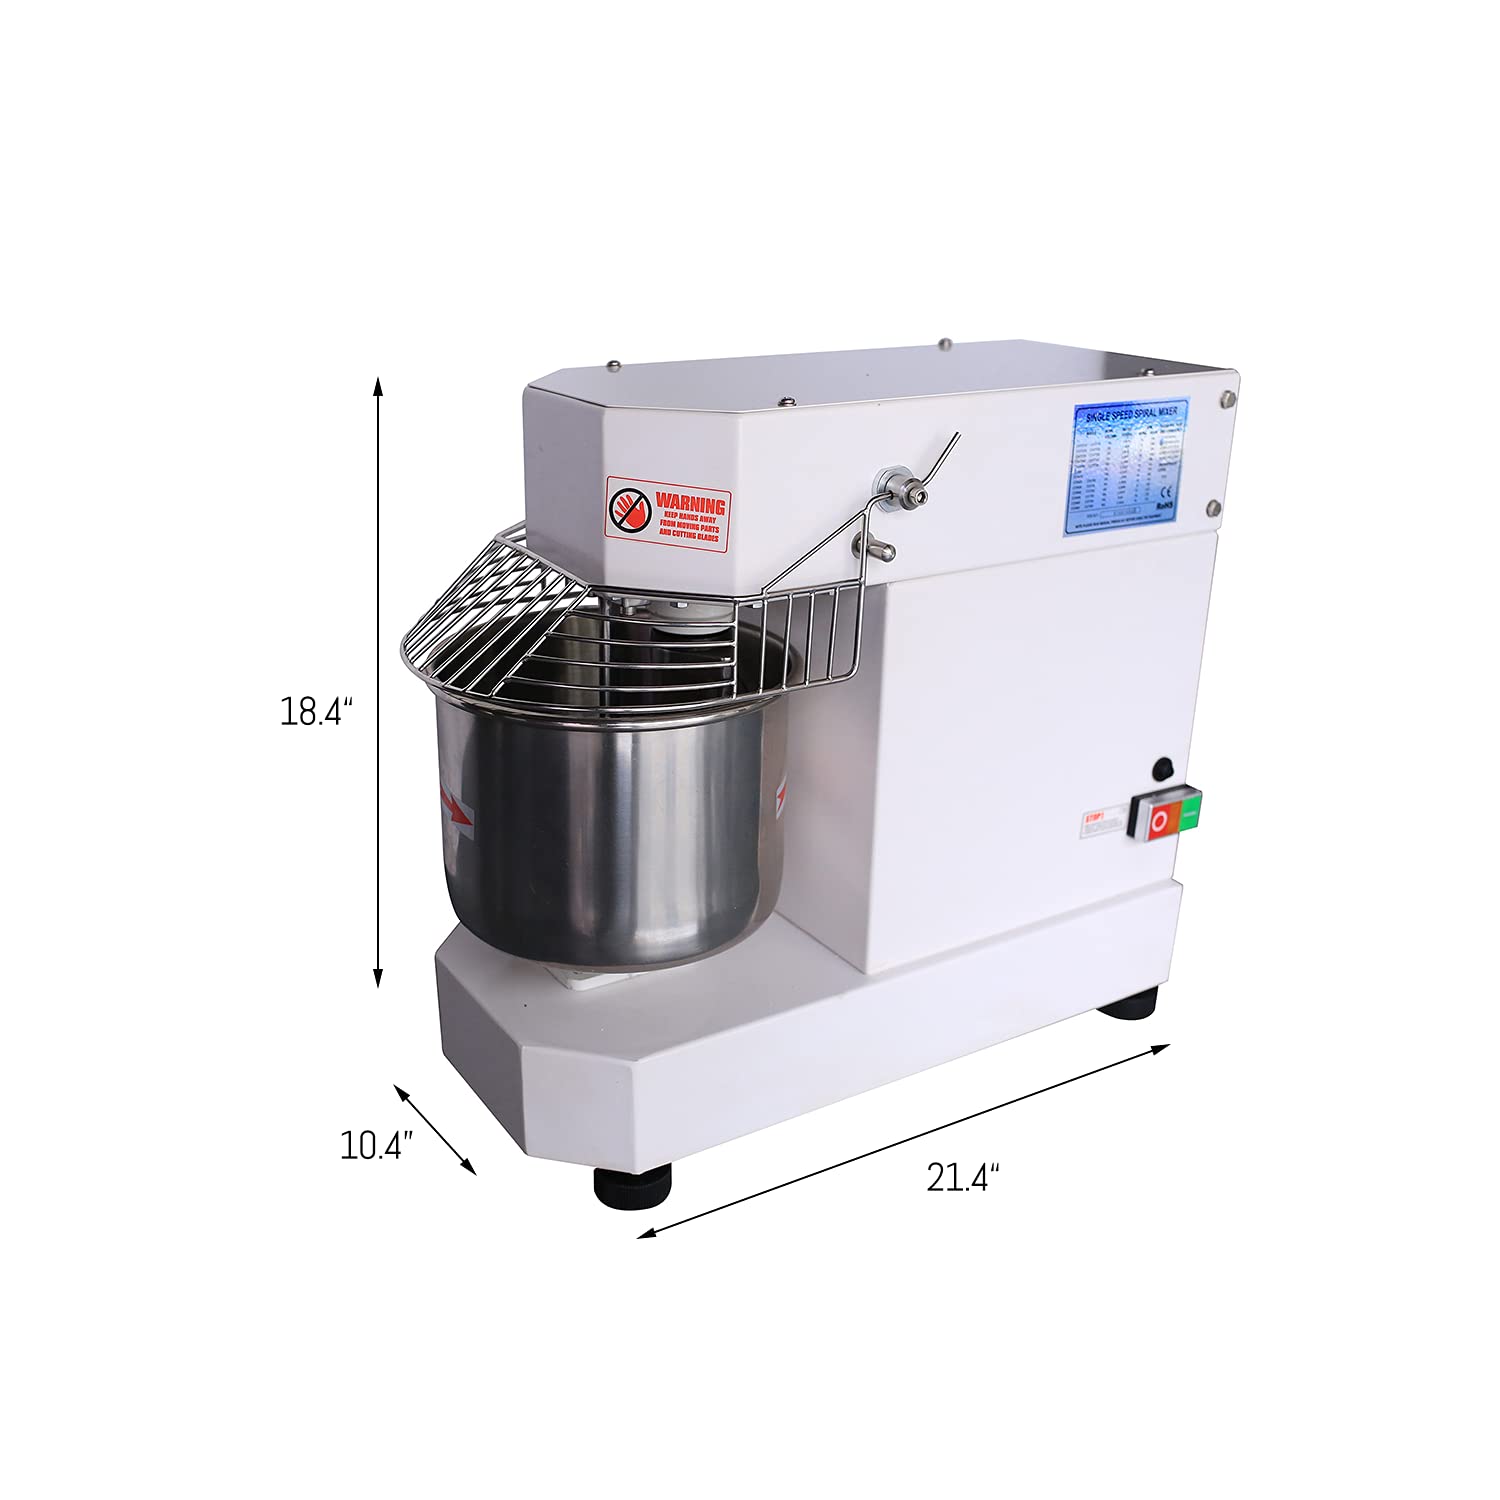 Multifunctional Industrial-Use Industrial Stirrer Mixing Pot 